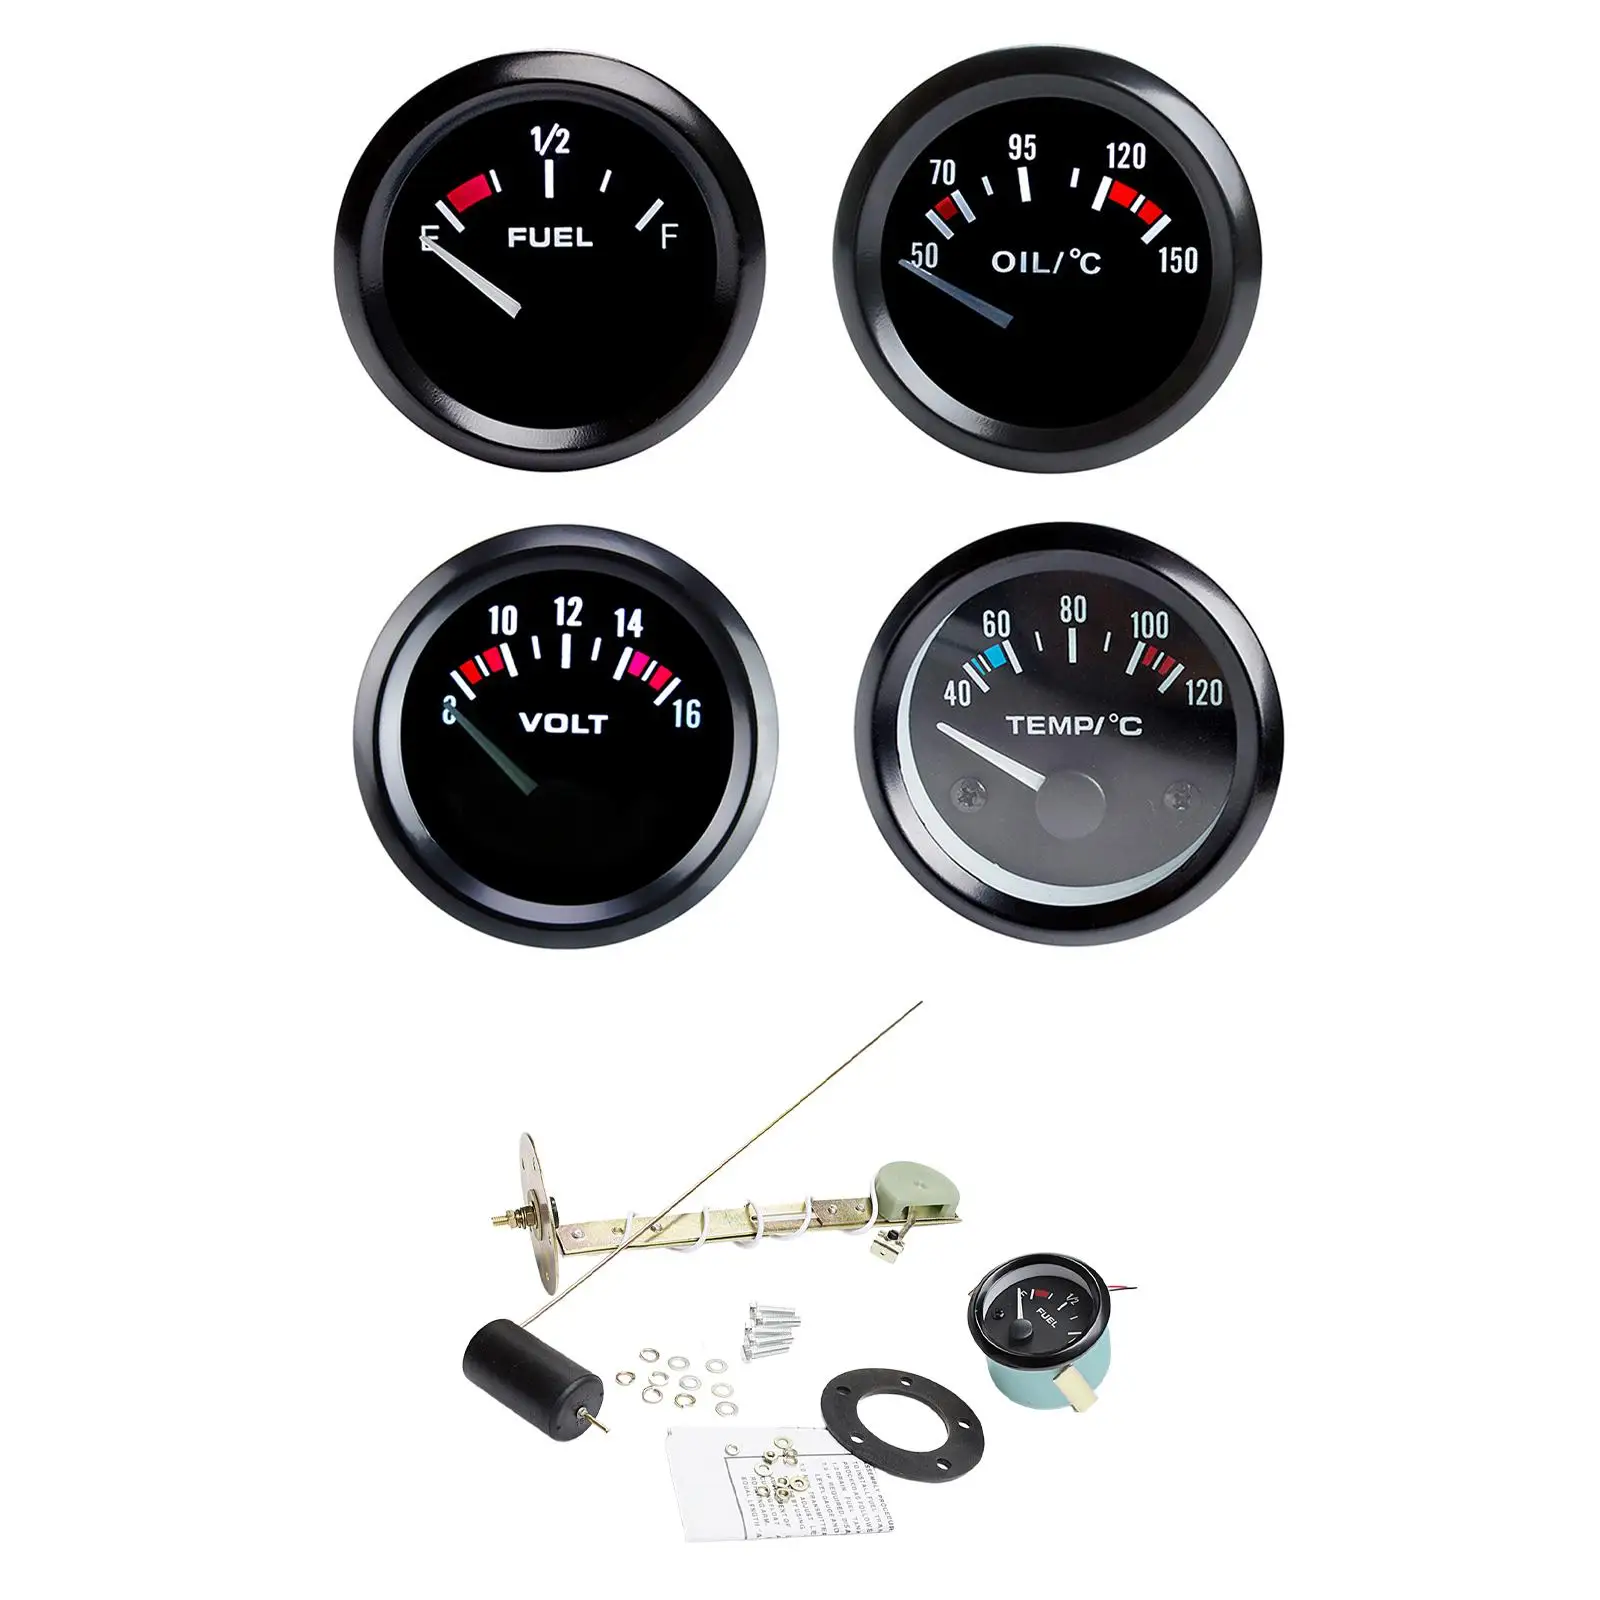 Fuel Gauge Meter Universal Adjustable 52mm 12V 2 inch for Premium High Performance Durable Replaces Car Accessories